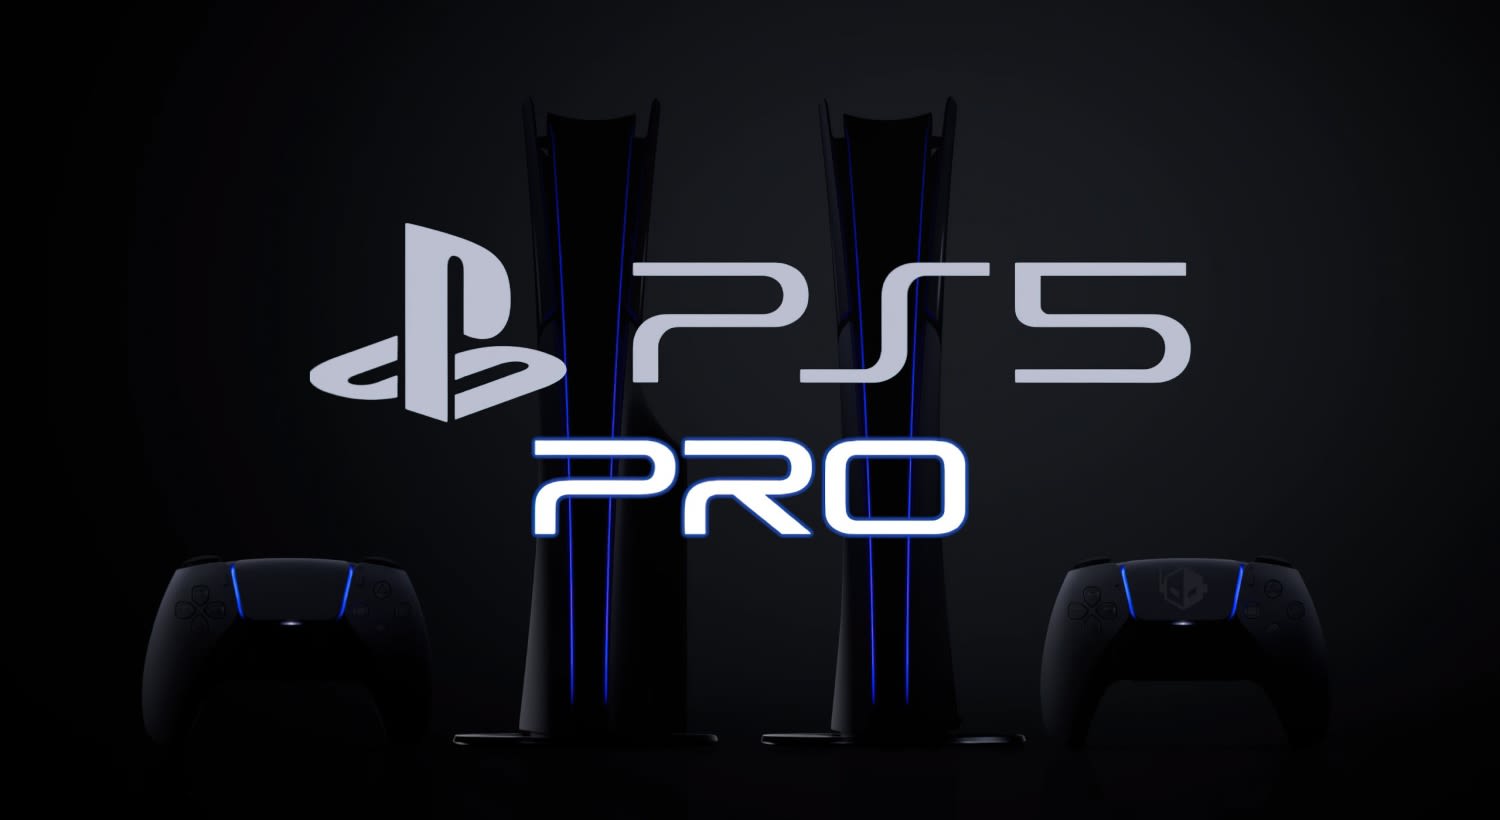 Sony's PlayStation 5 Pro is expected to fix critical issues in select games